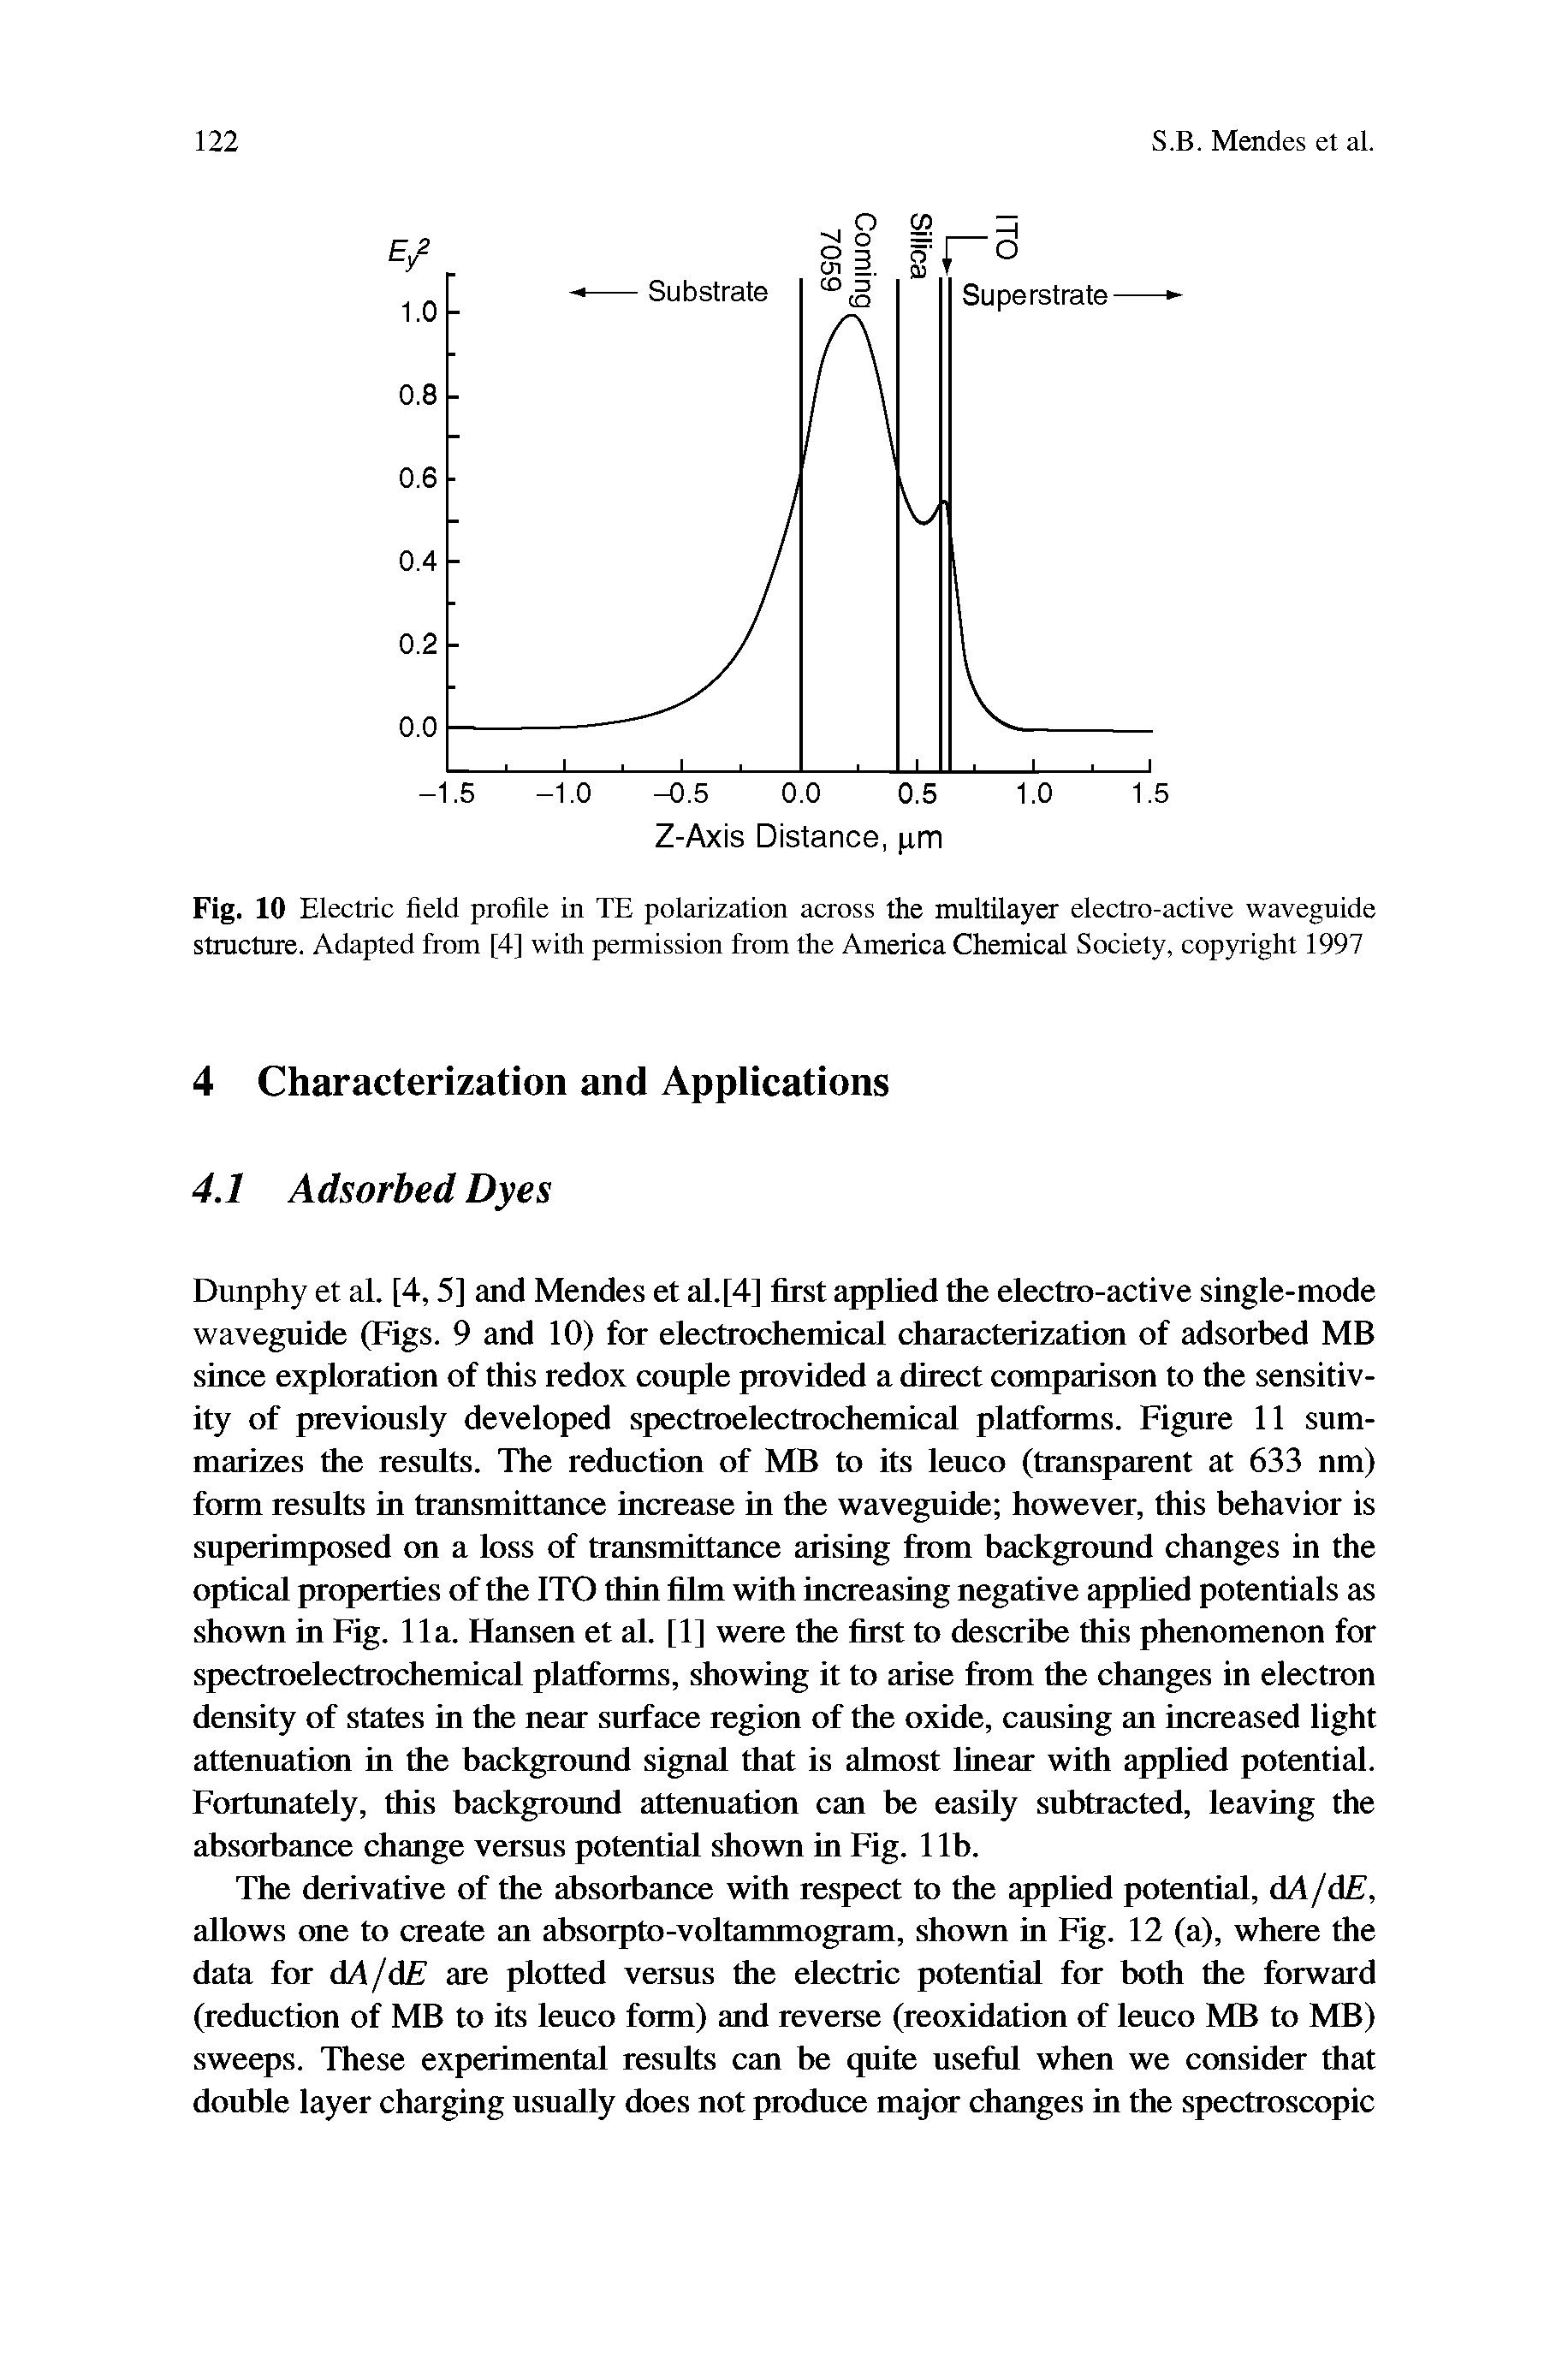 Fig. 10 Electric field profile in TE polarization across the multilayer electro-active waveguide structure. Adapted from [4] with permission from the America Chemical Society, copyright 1997...